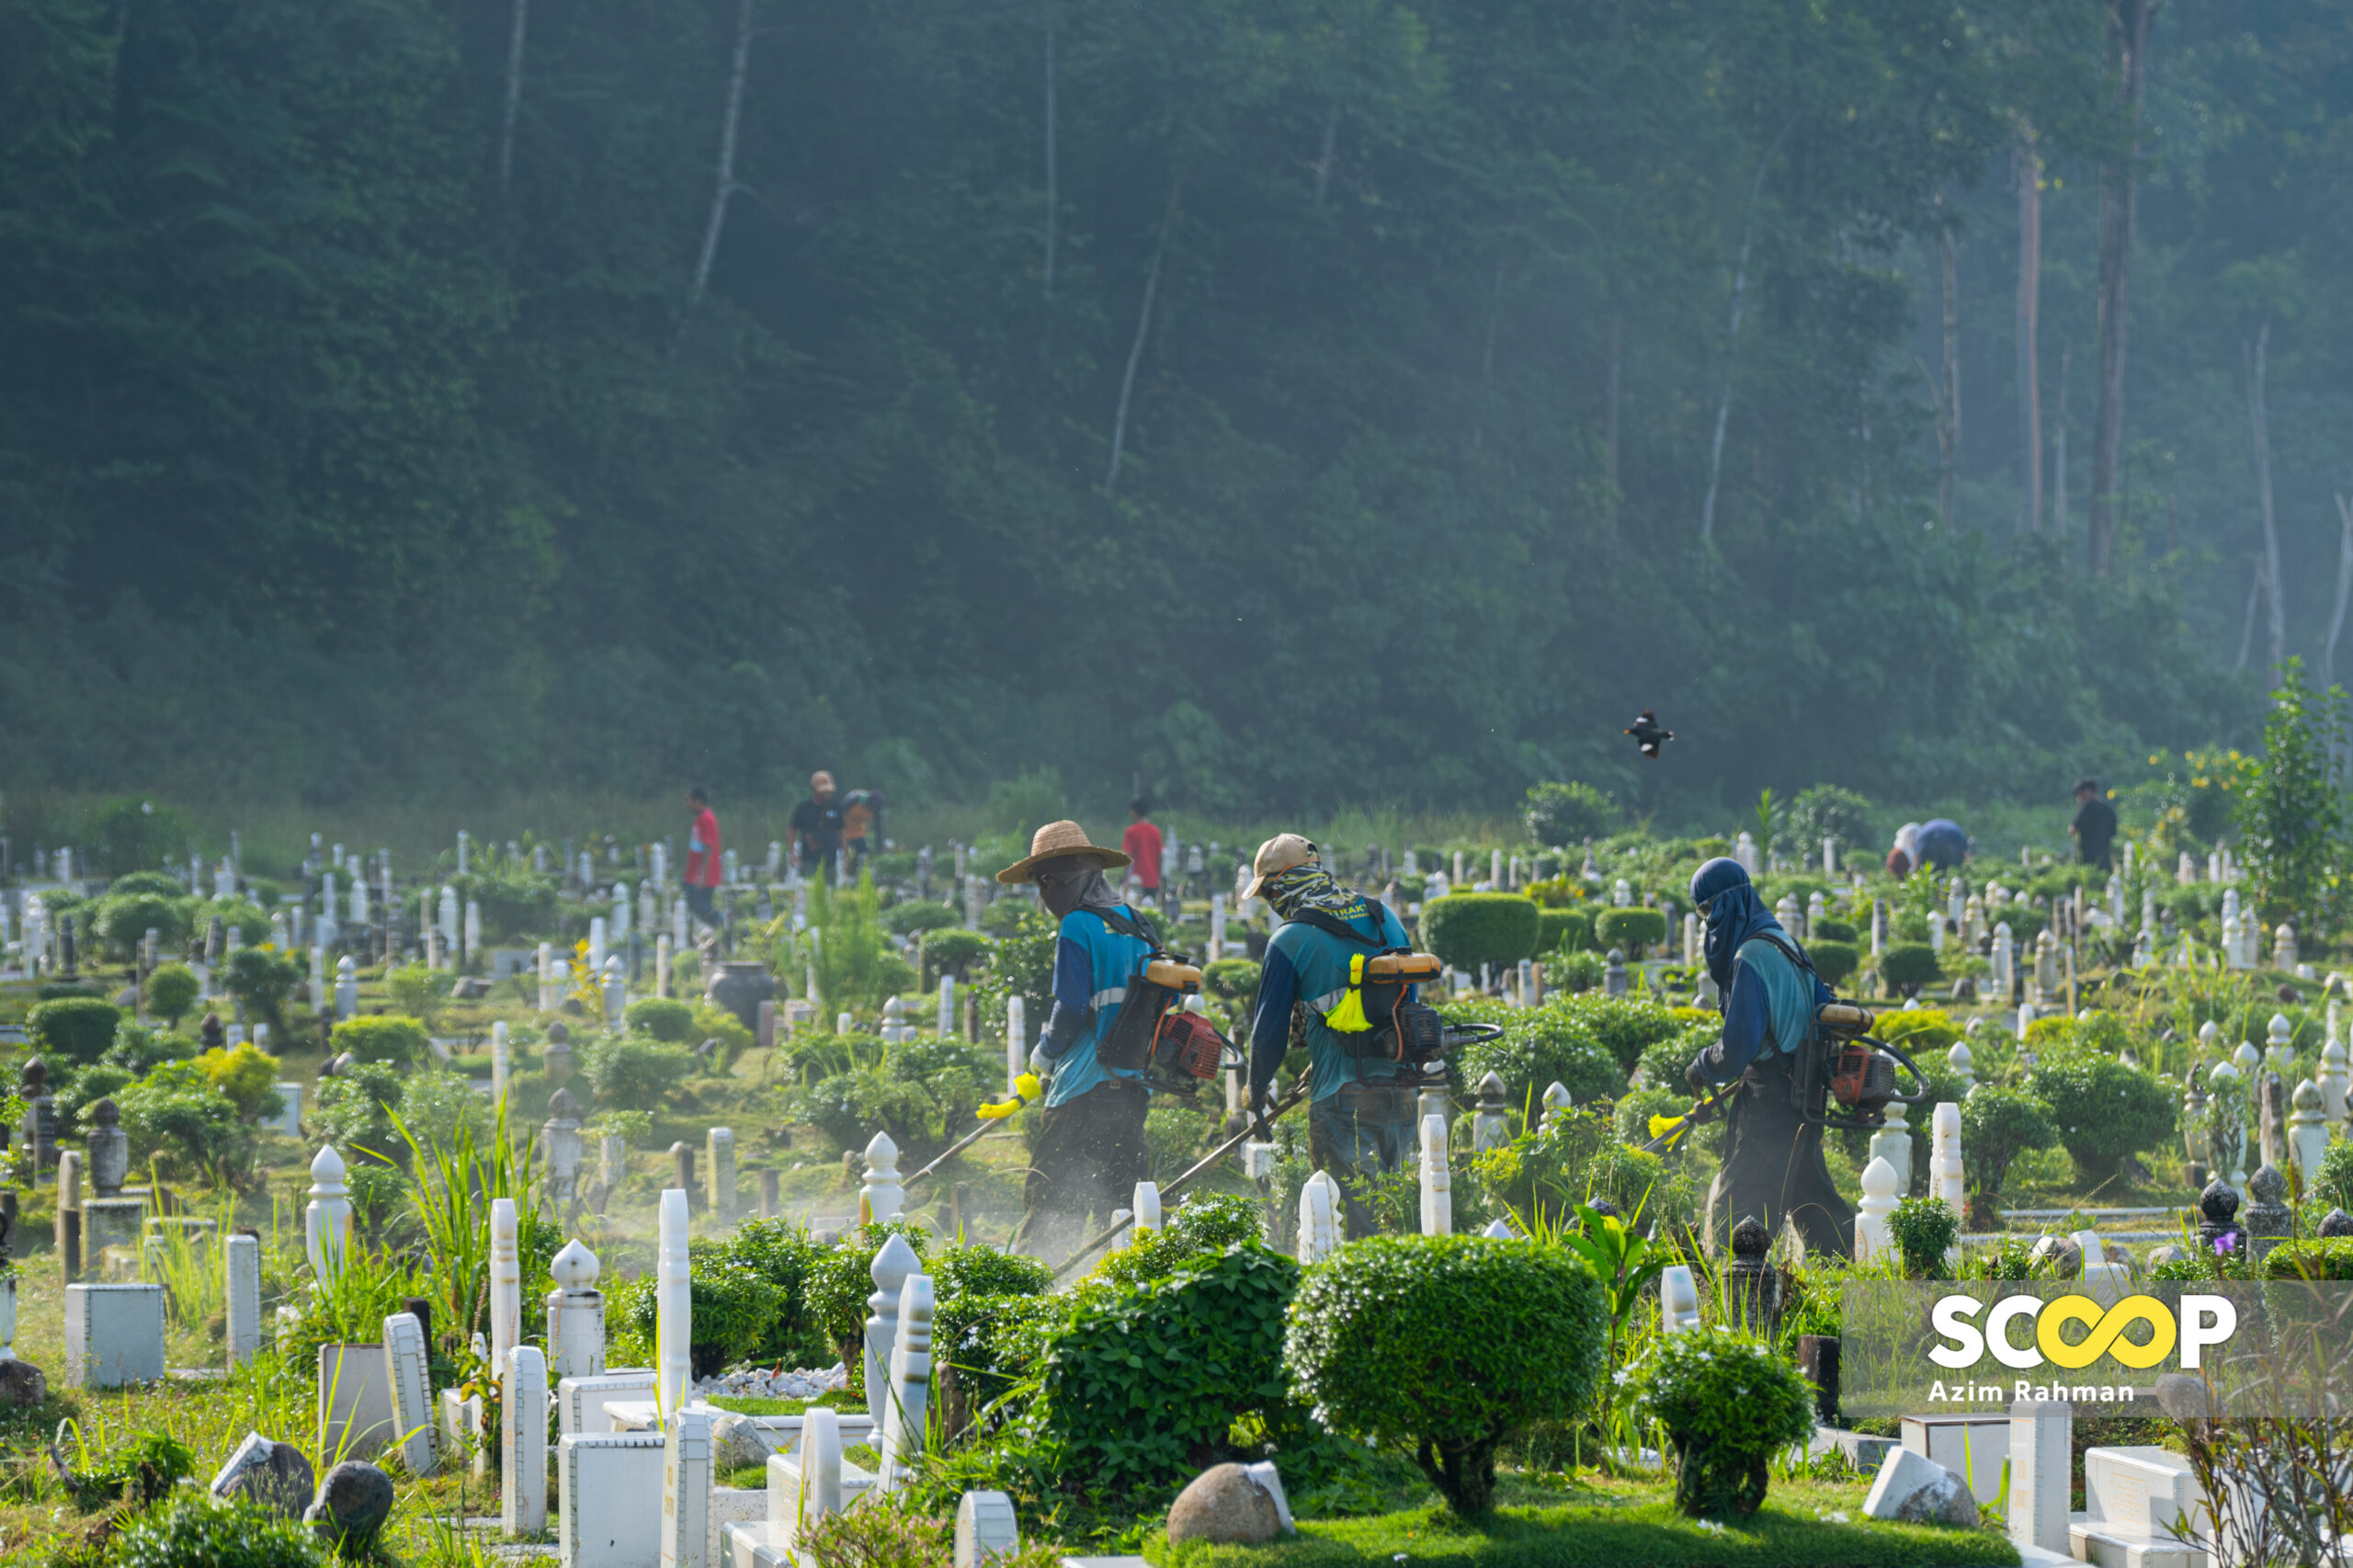 Photo of the day: Tending to traditions with care and charm on cemetery grounds